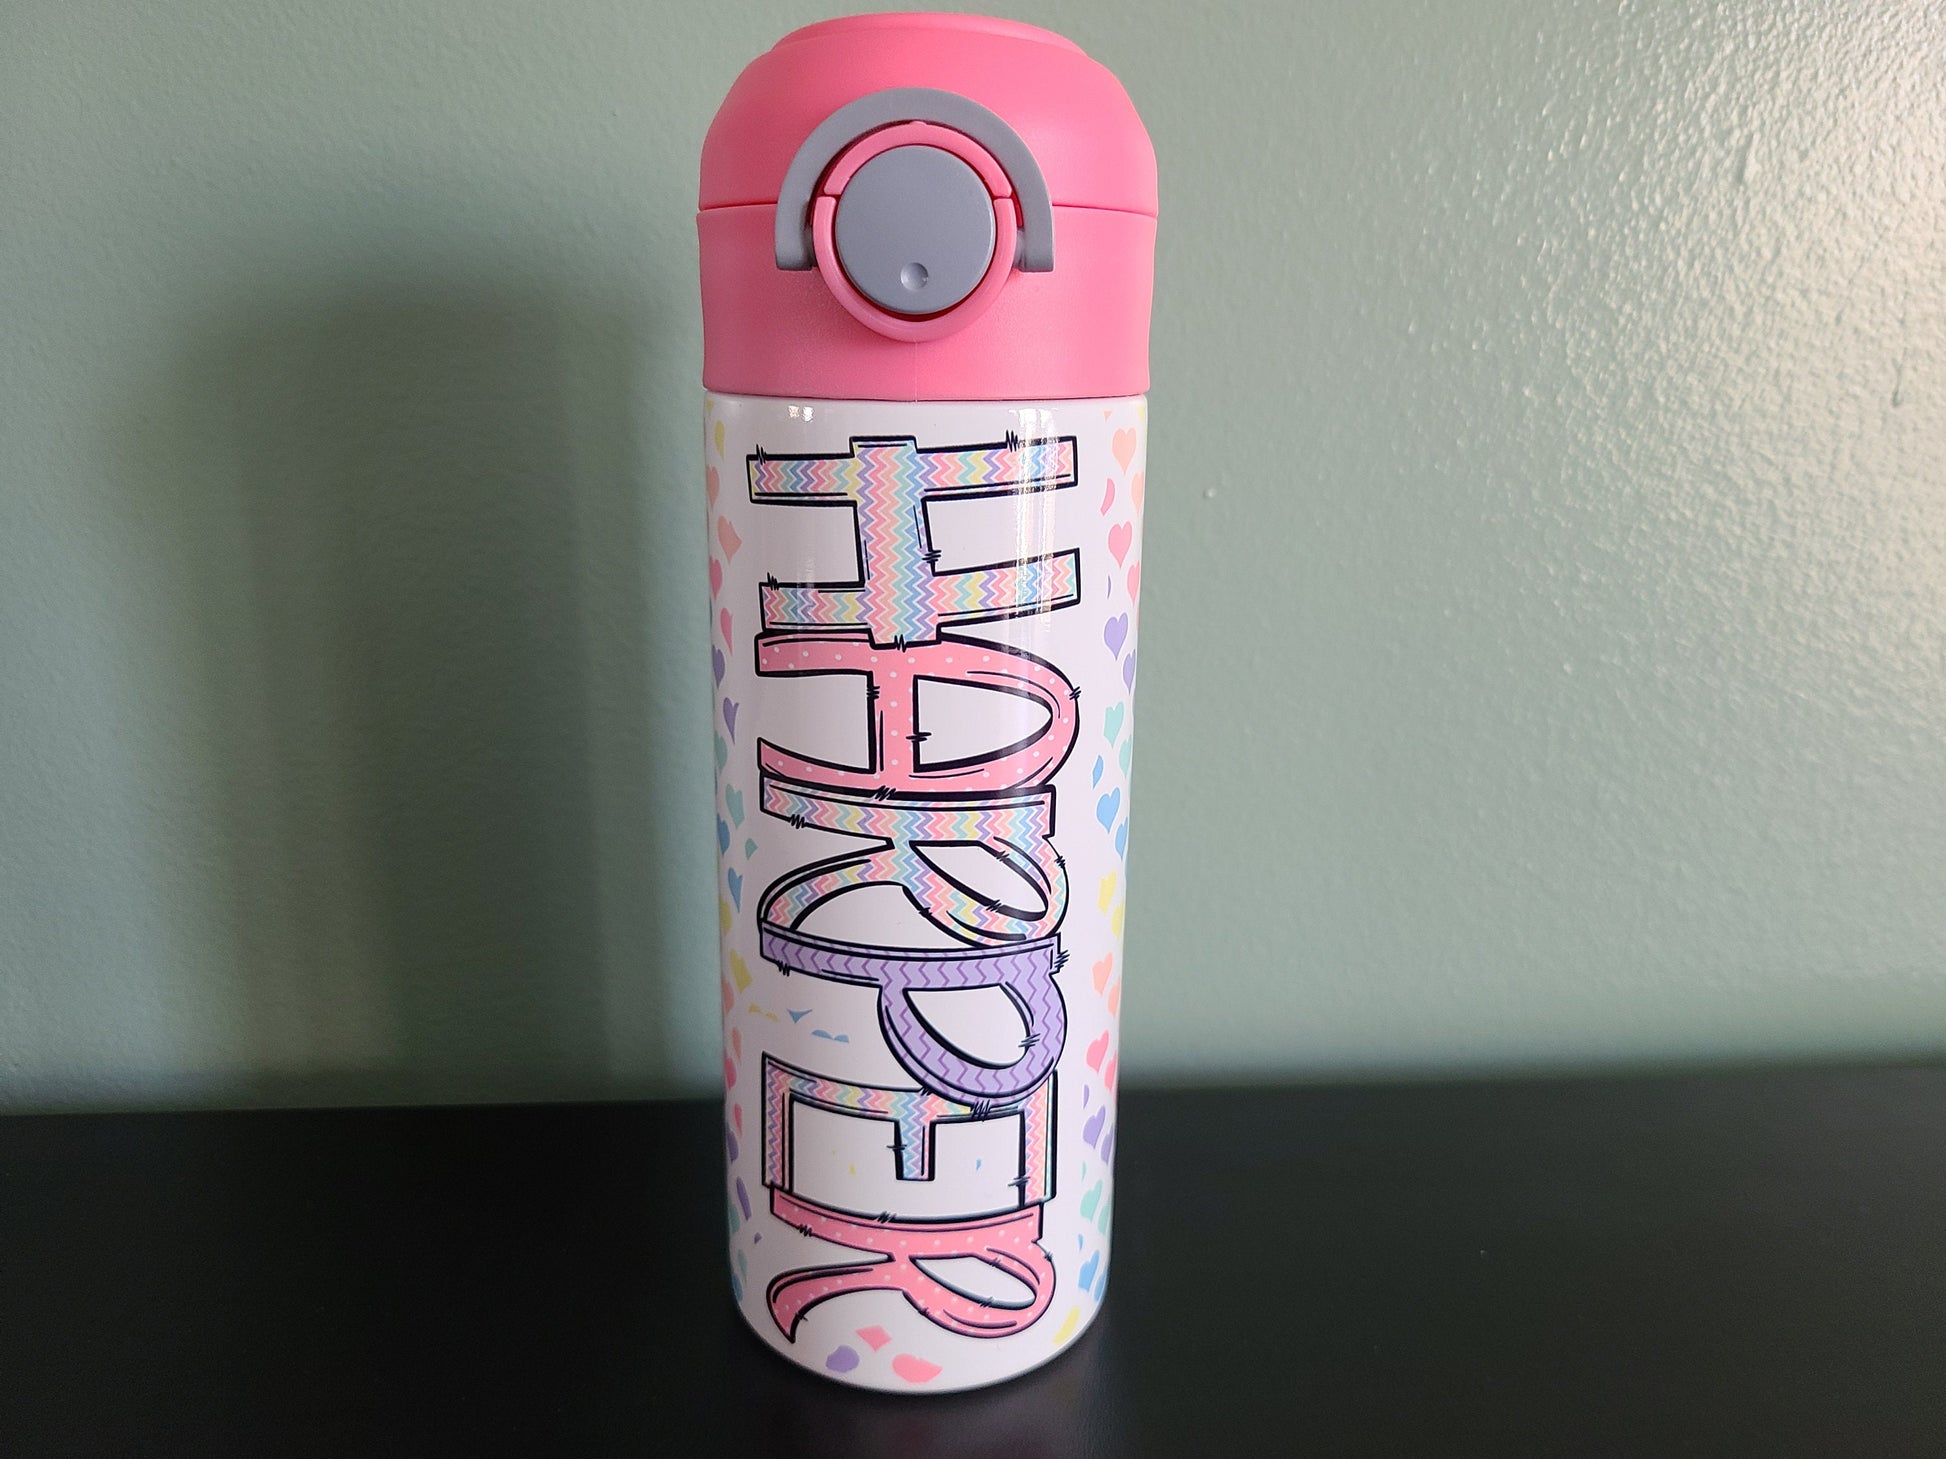 Pink Sparkles Kids Water Bottle, Kids Sippy Cup, Toddler Water Bottle,  Personalized Kids Water Bottle 